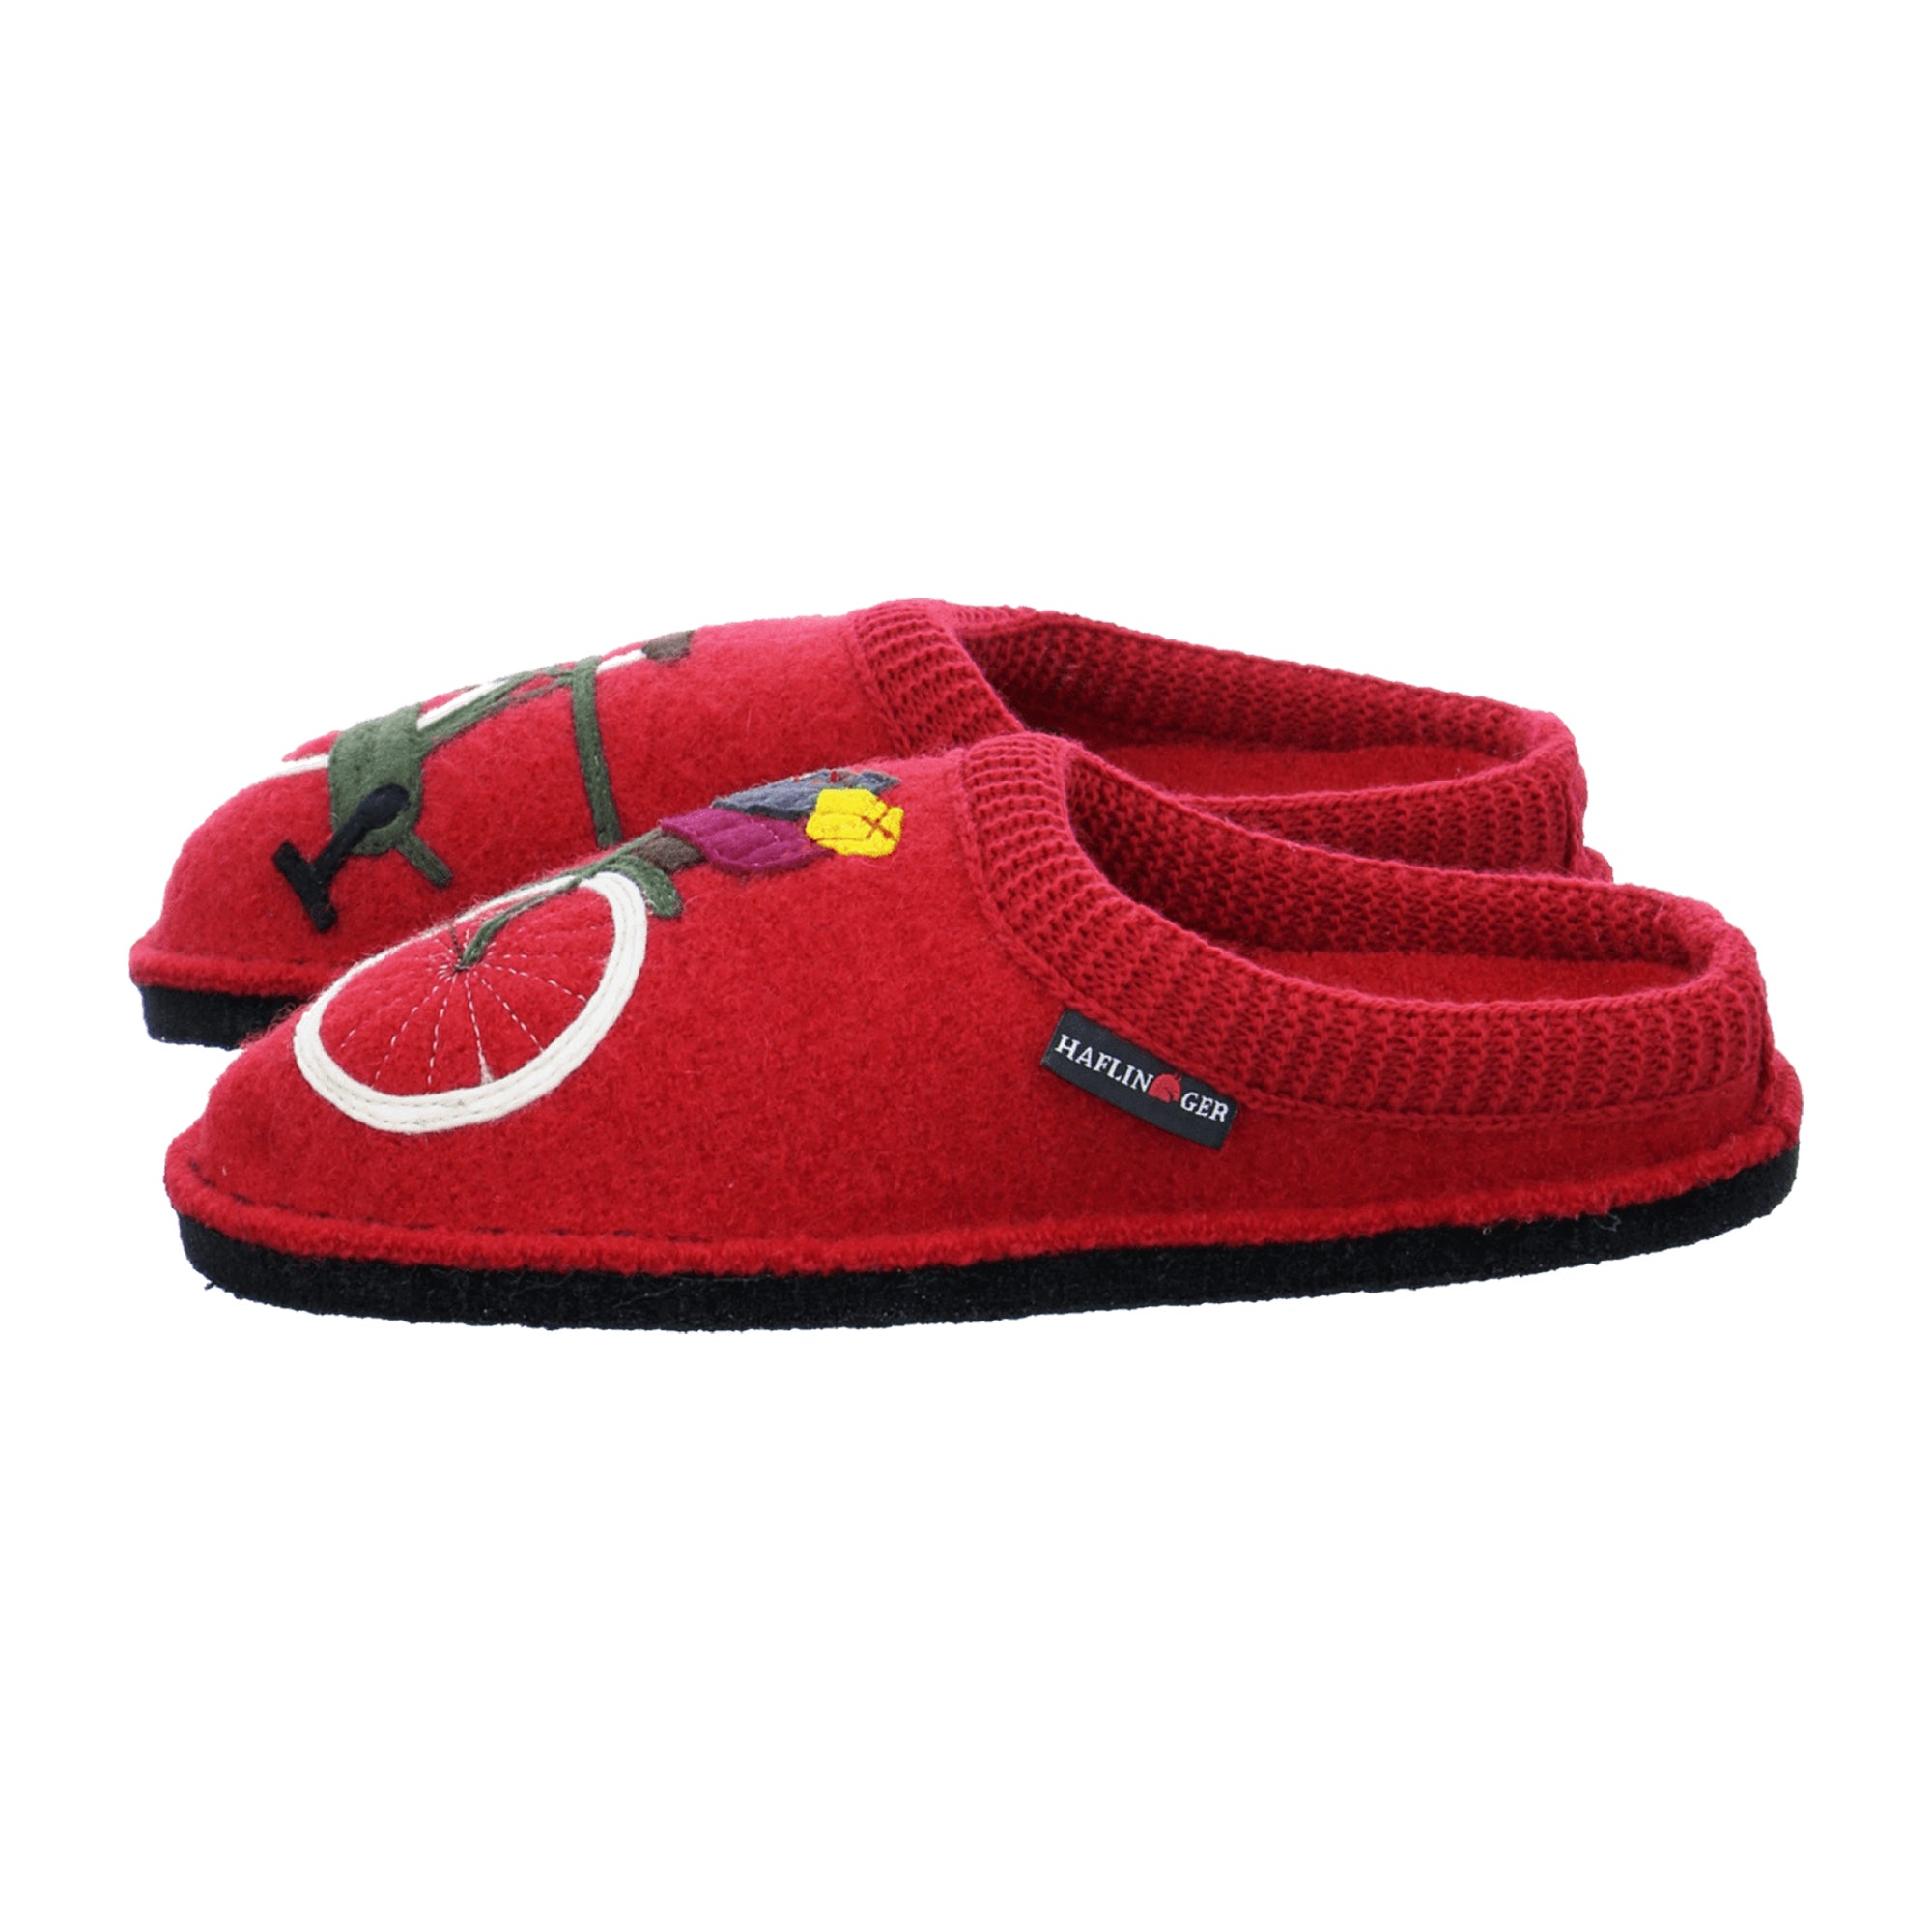 Haflinger Flair Radl Women's Slippers - Durable Black with Red Accents